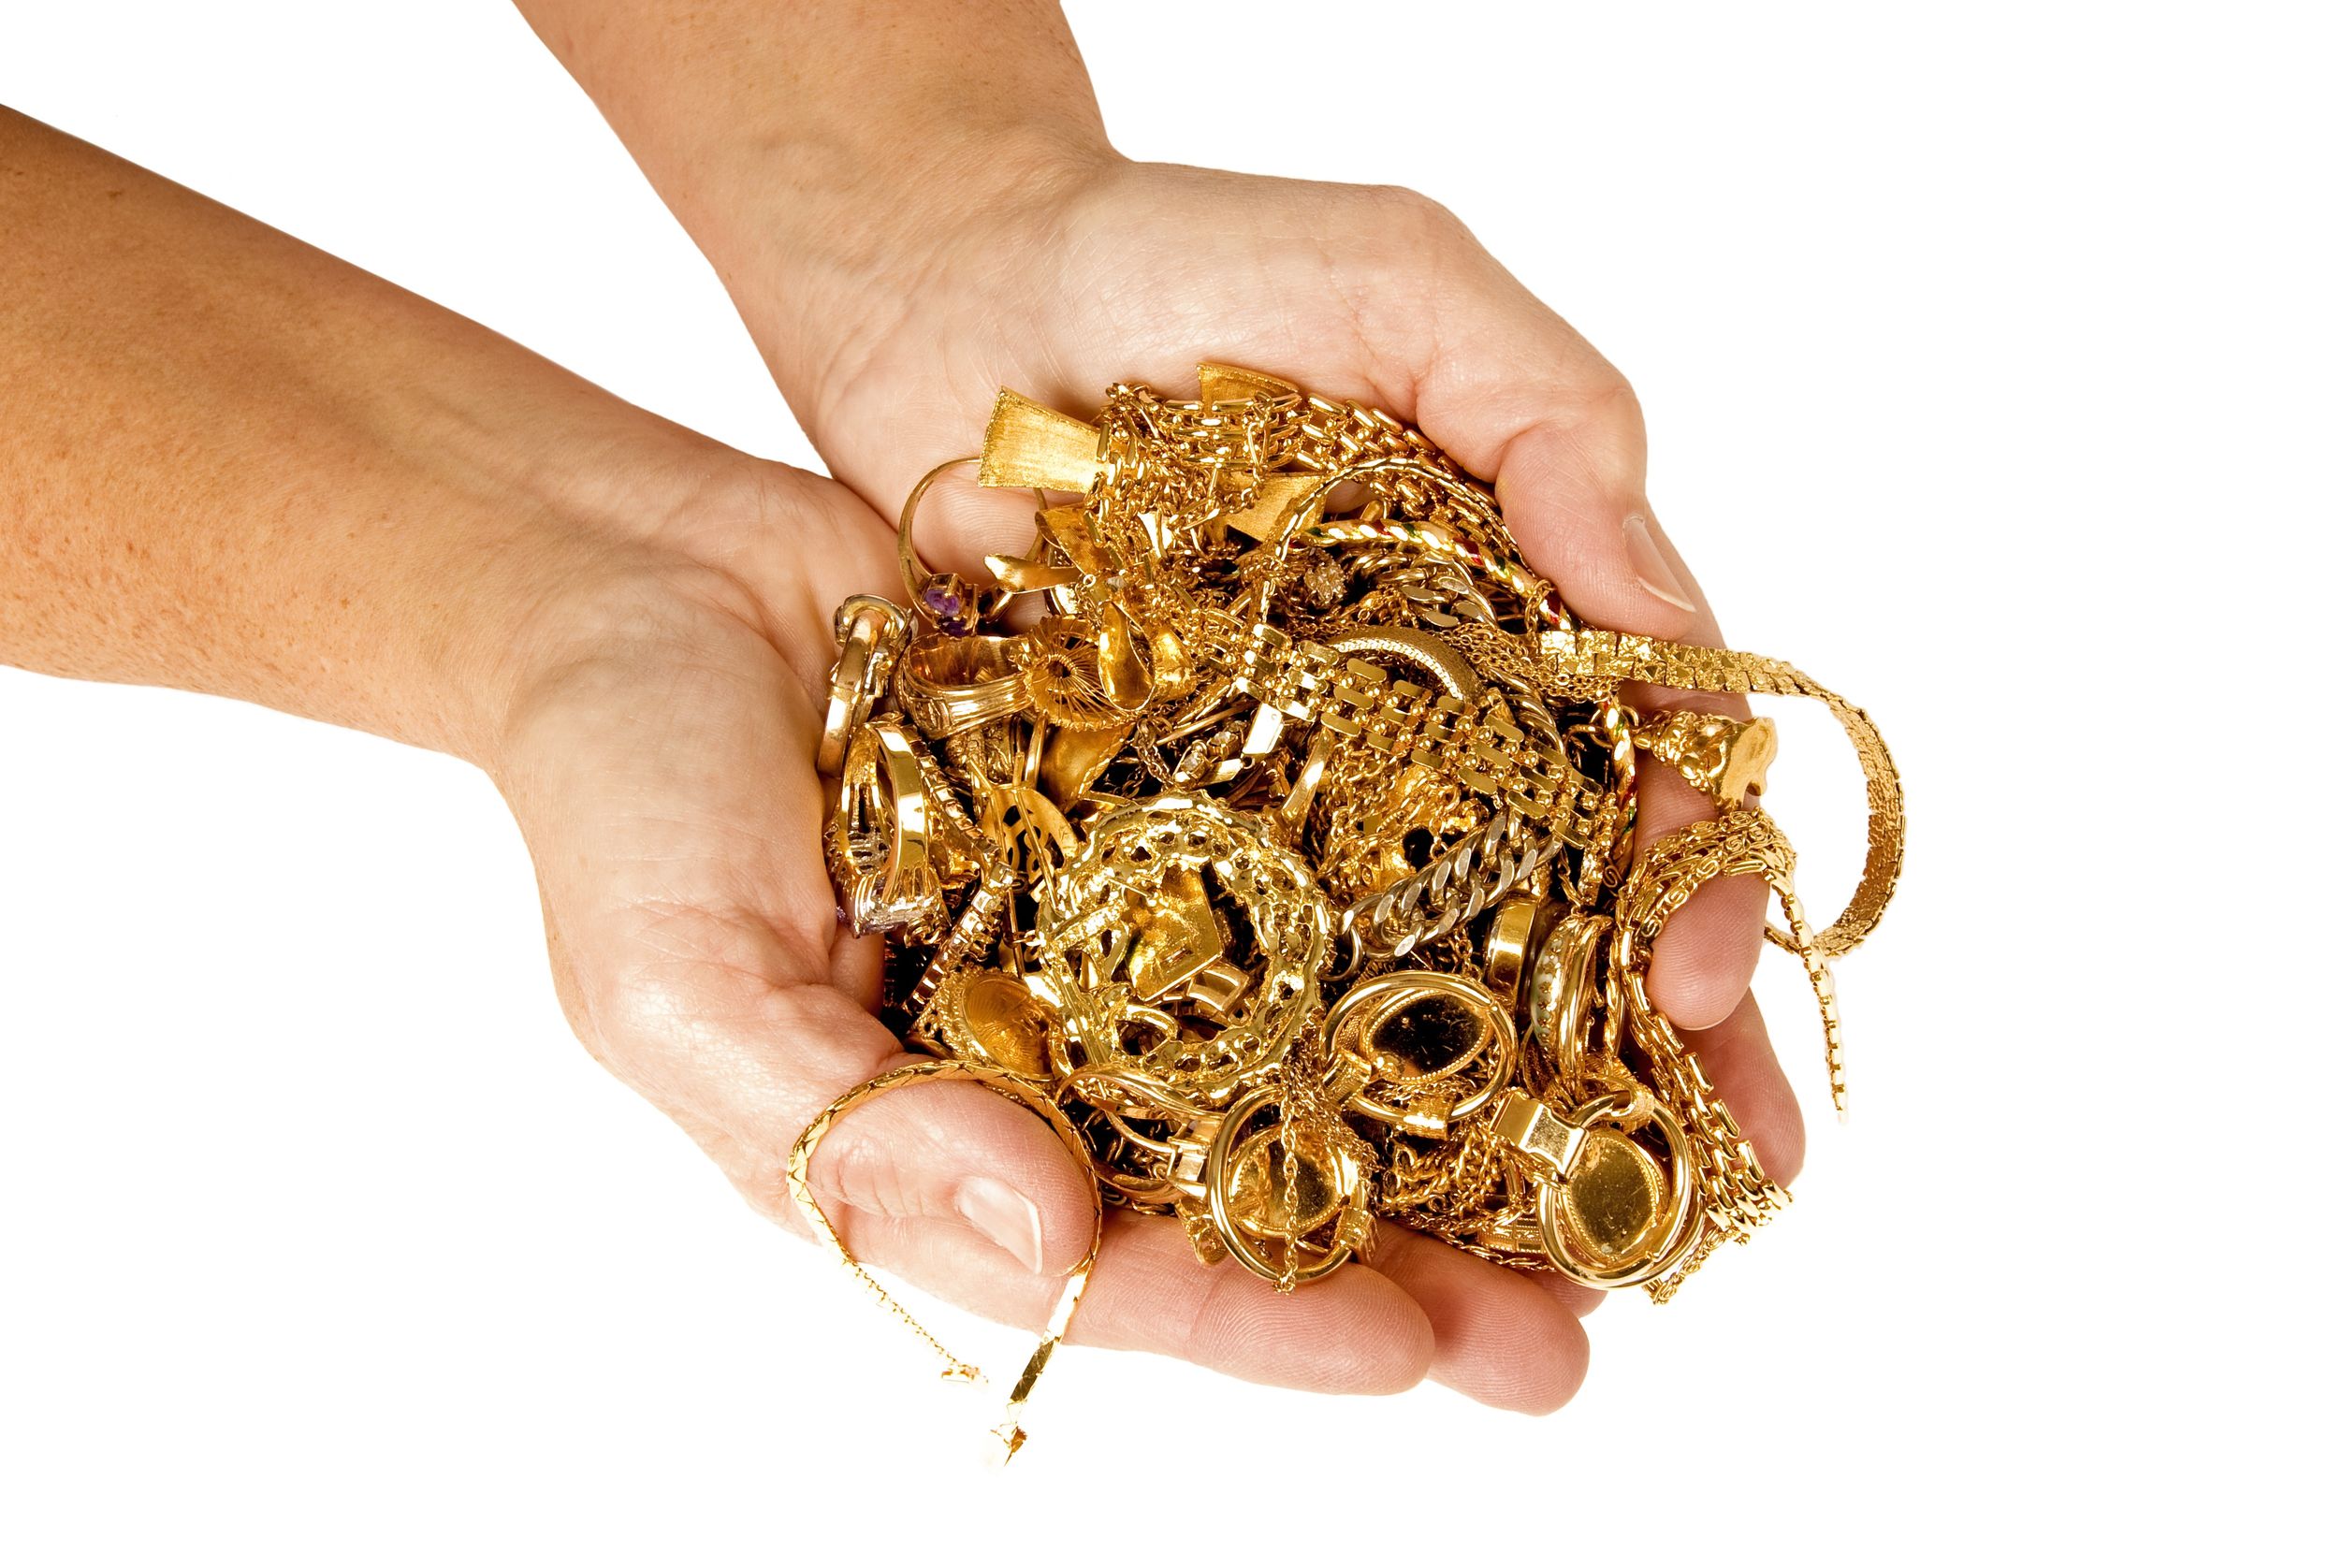 Image of hands holding a pile of gold jewelry